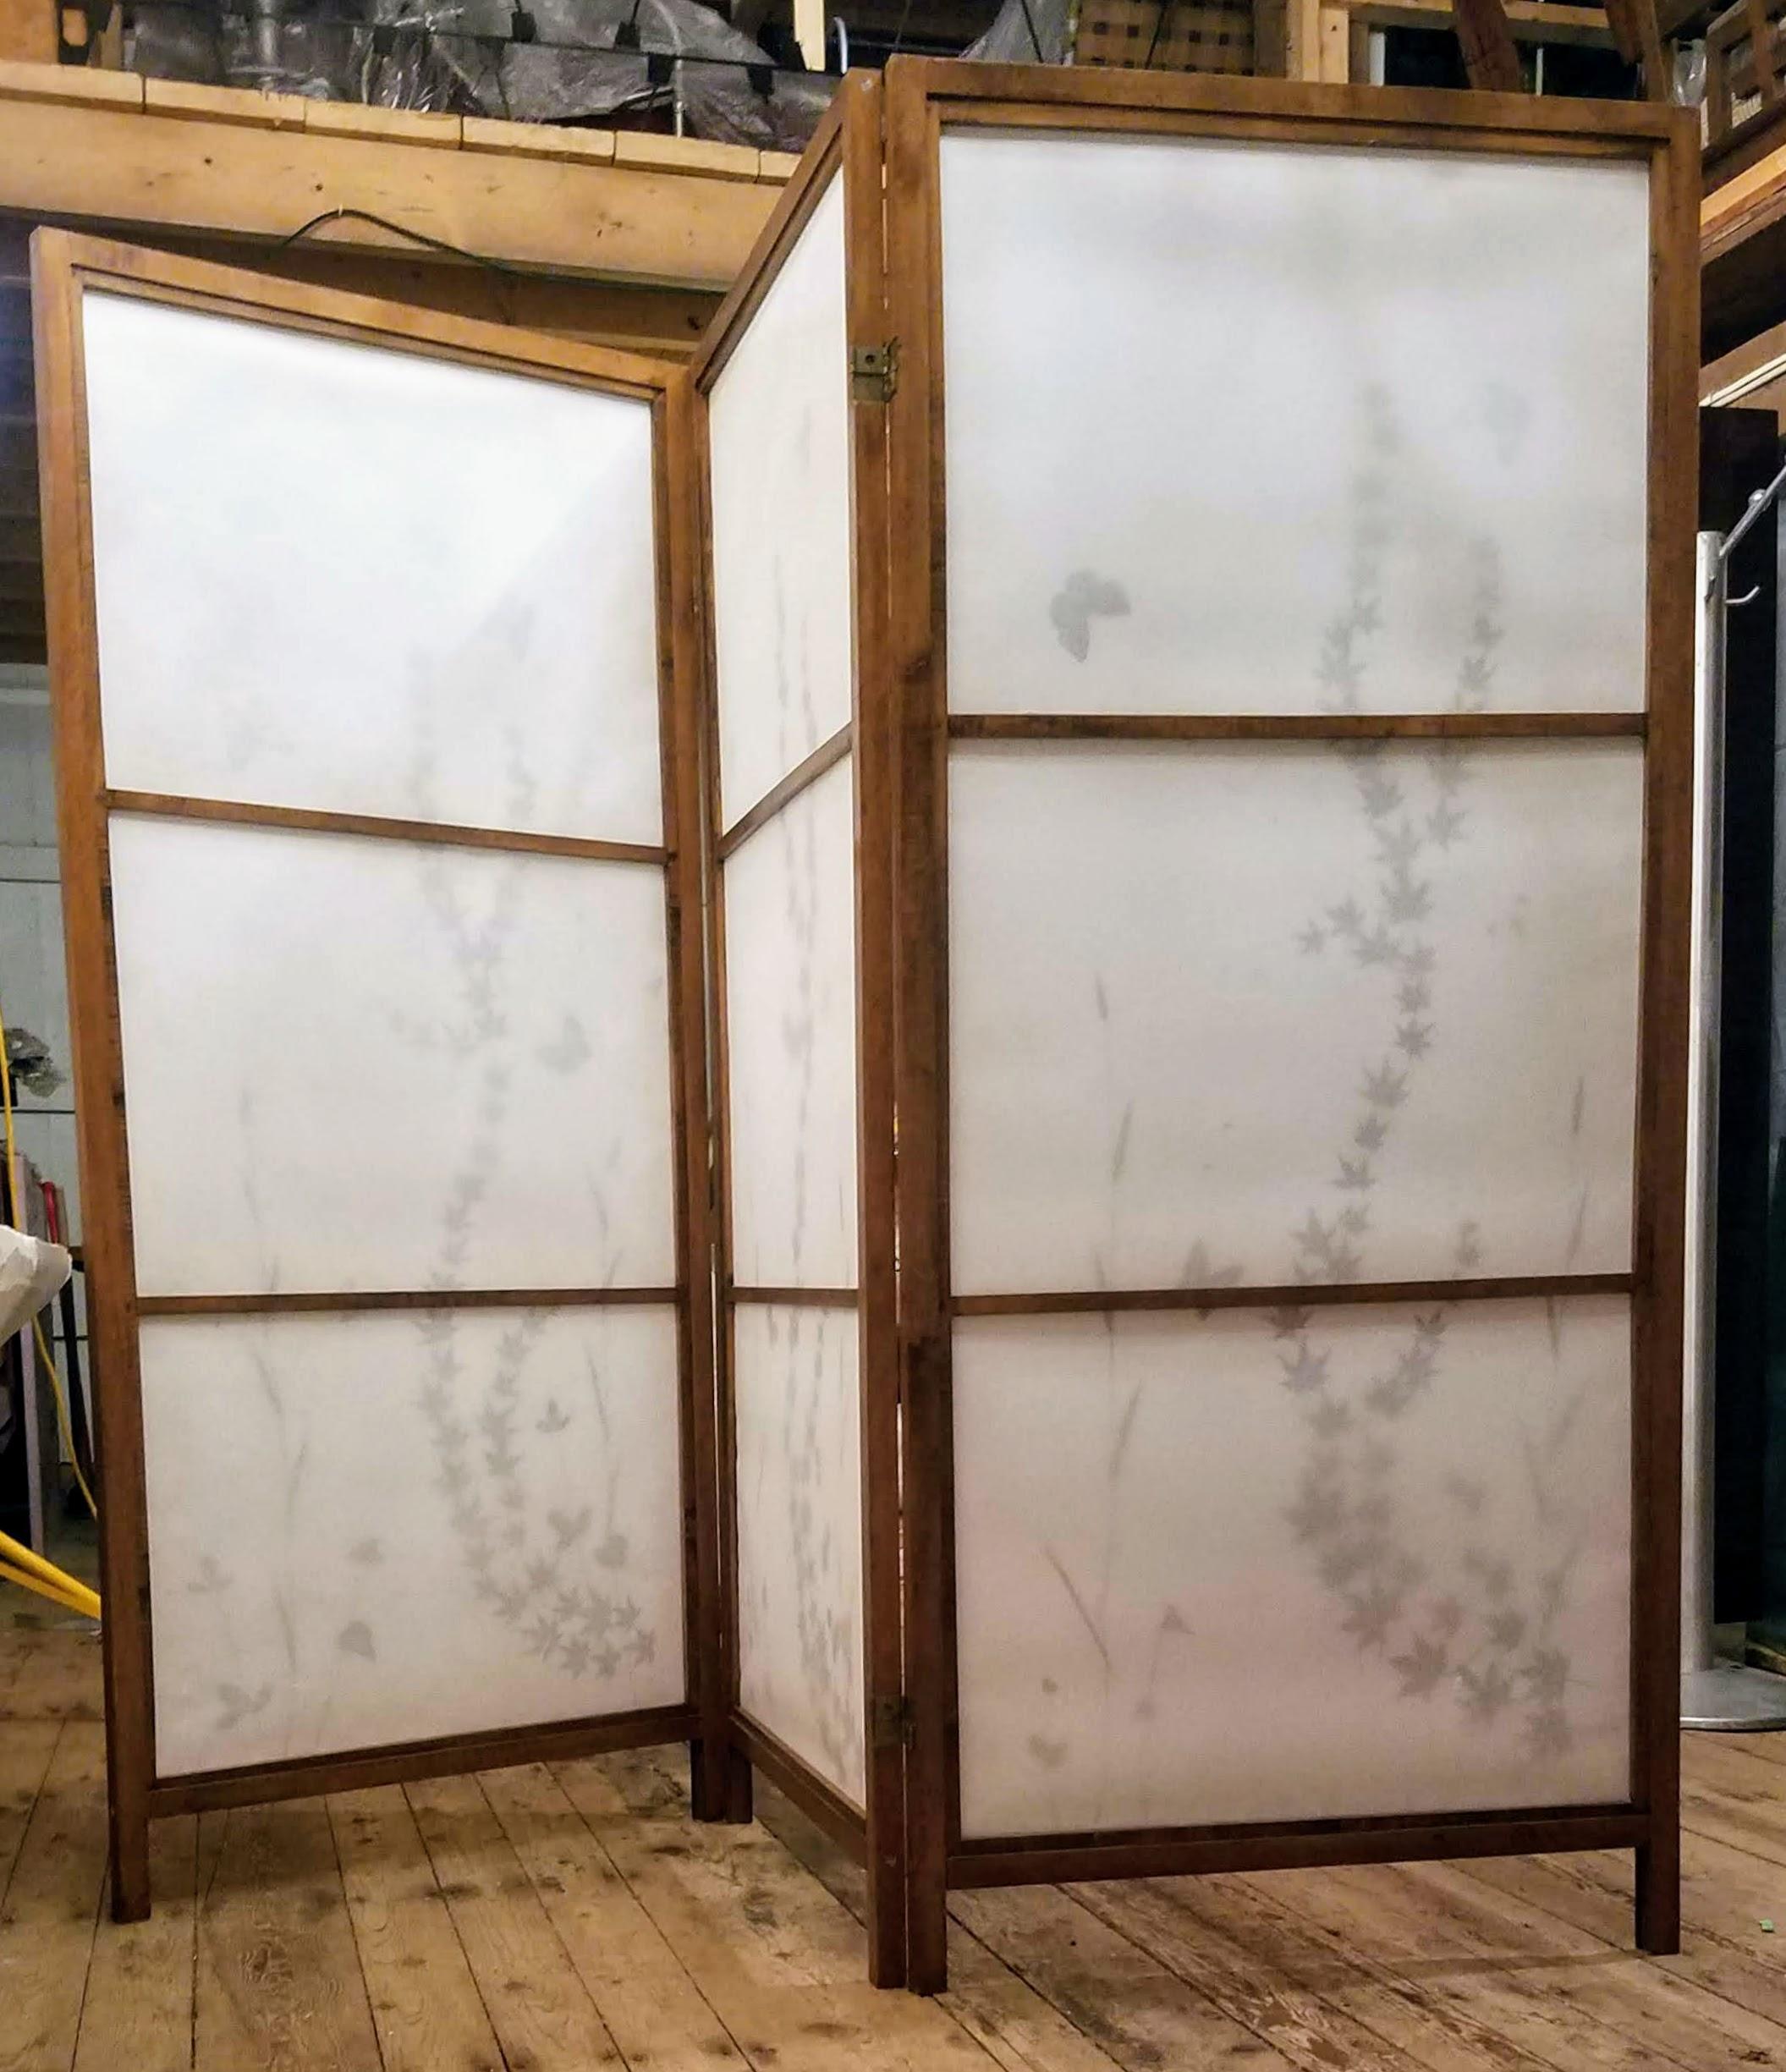 Unusual folding floor Shoji screen beautifully crafted with an elmwood frame in Japan in the 1950s-1960s. 

The inset panels are vintage Washi Shoji paper with maple leafs, butterflies and sea grass captured between two sheets of rice paper for each